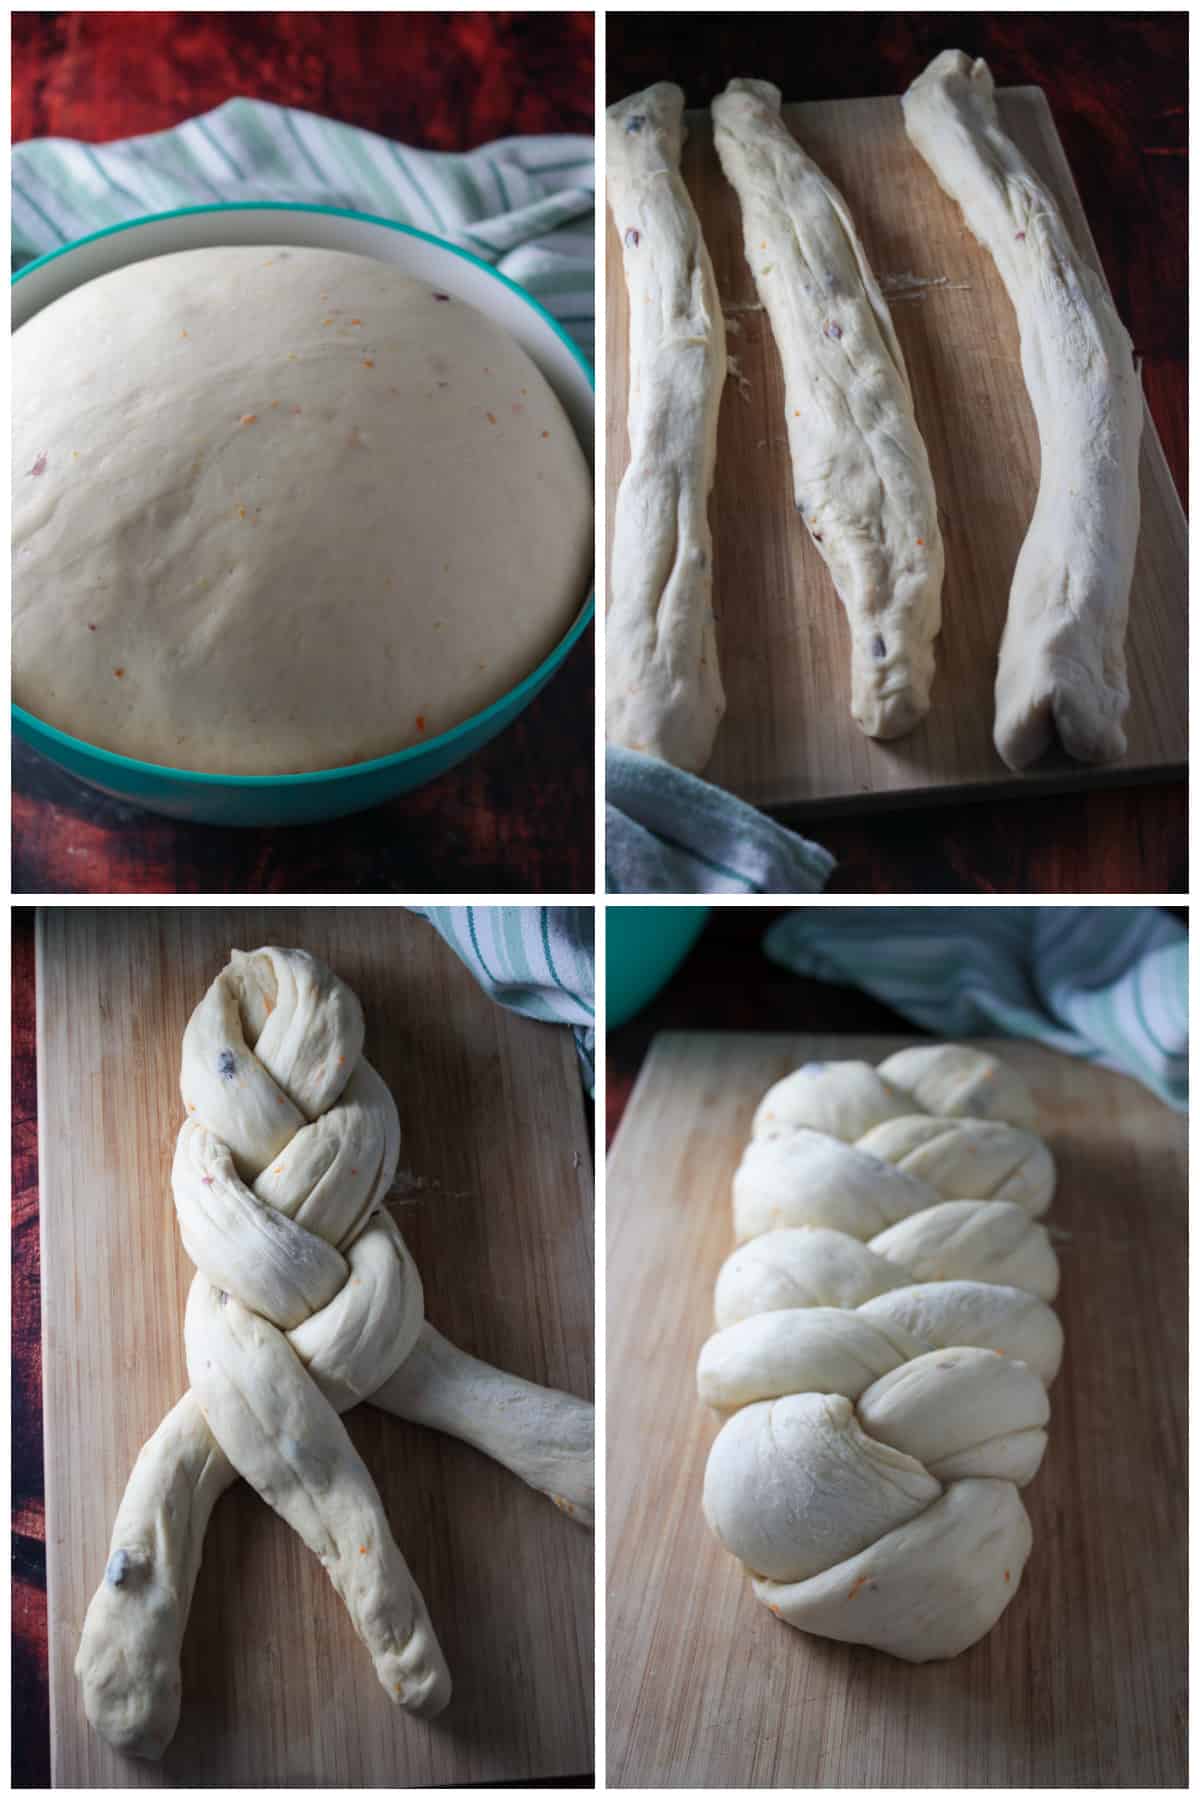 A collage showing the process of braiding a loaf.